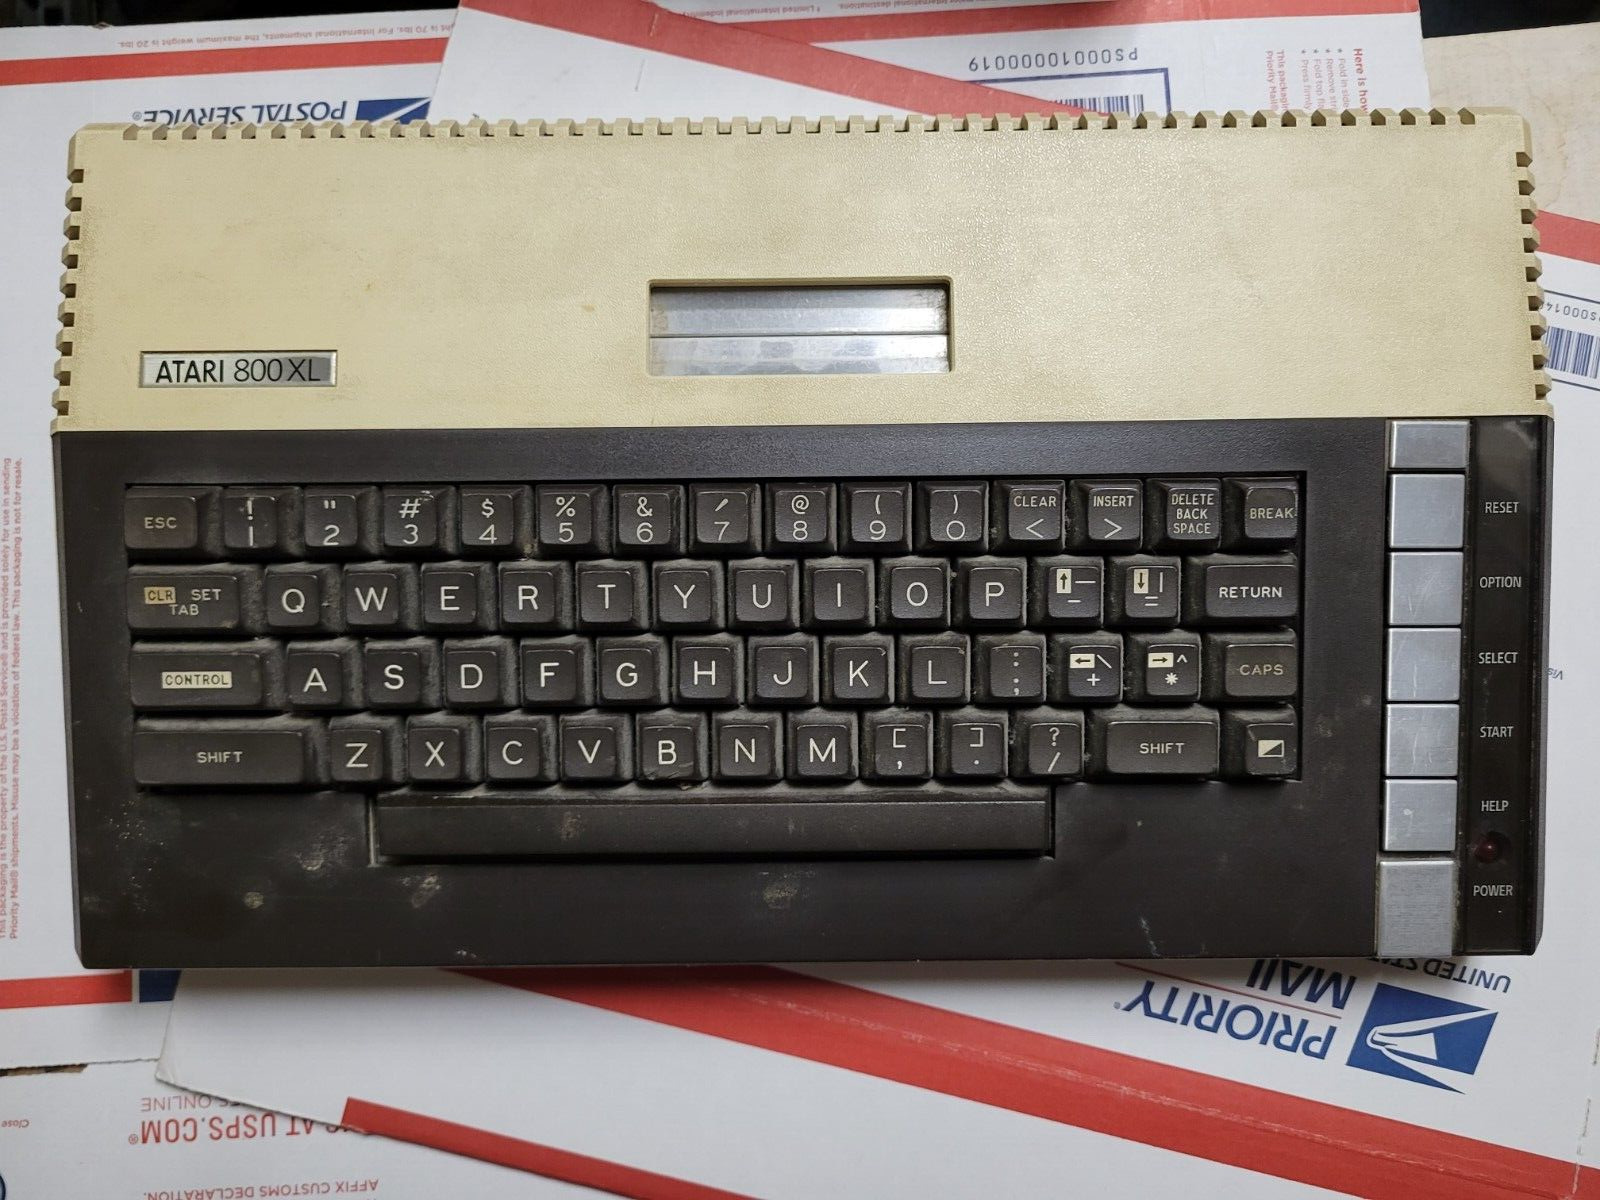 Atari 800XL (1983) Used Working Computer Overall Good Shape, Blemishes on Case